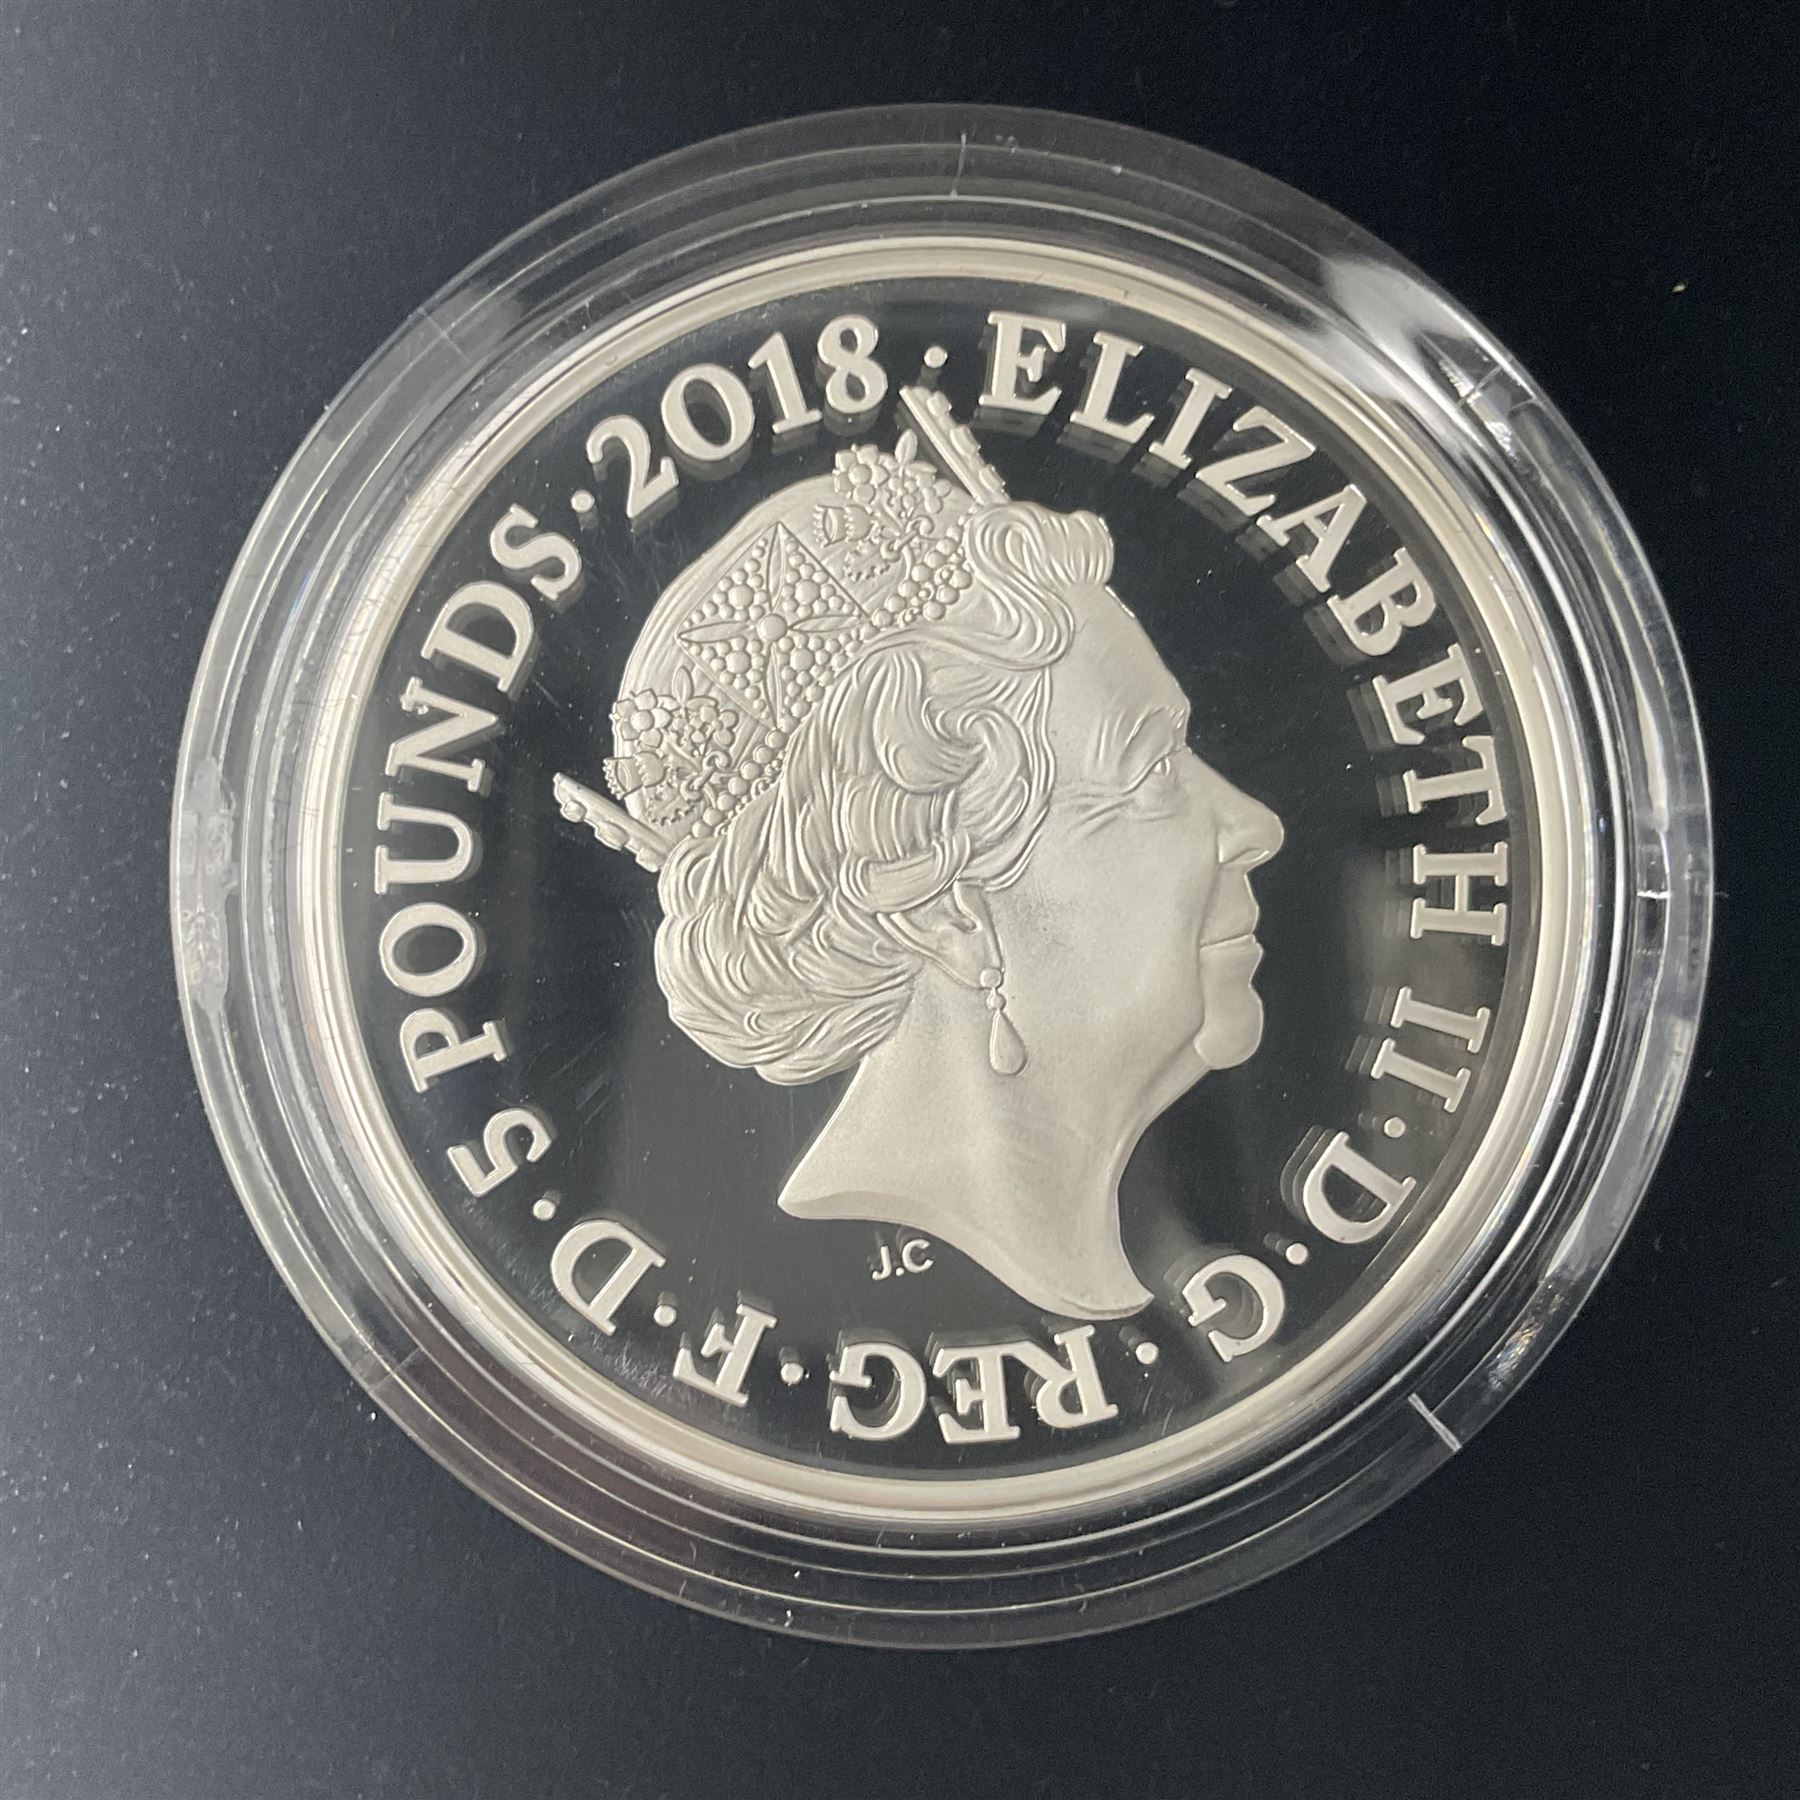 Five The Royal Mint United Kingdom 2018 silver proof piedfort five pound coins - Image 6 of 16